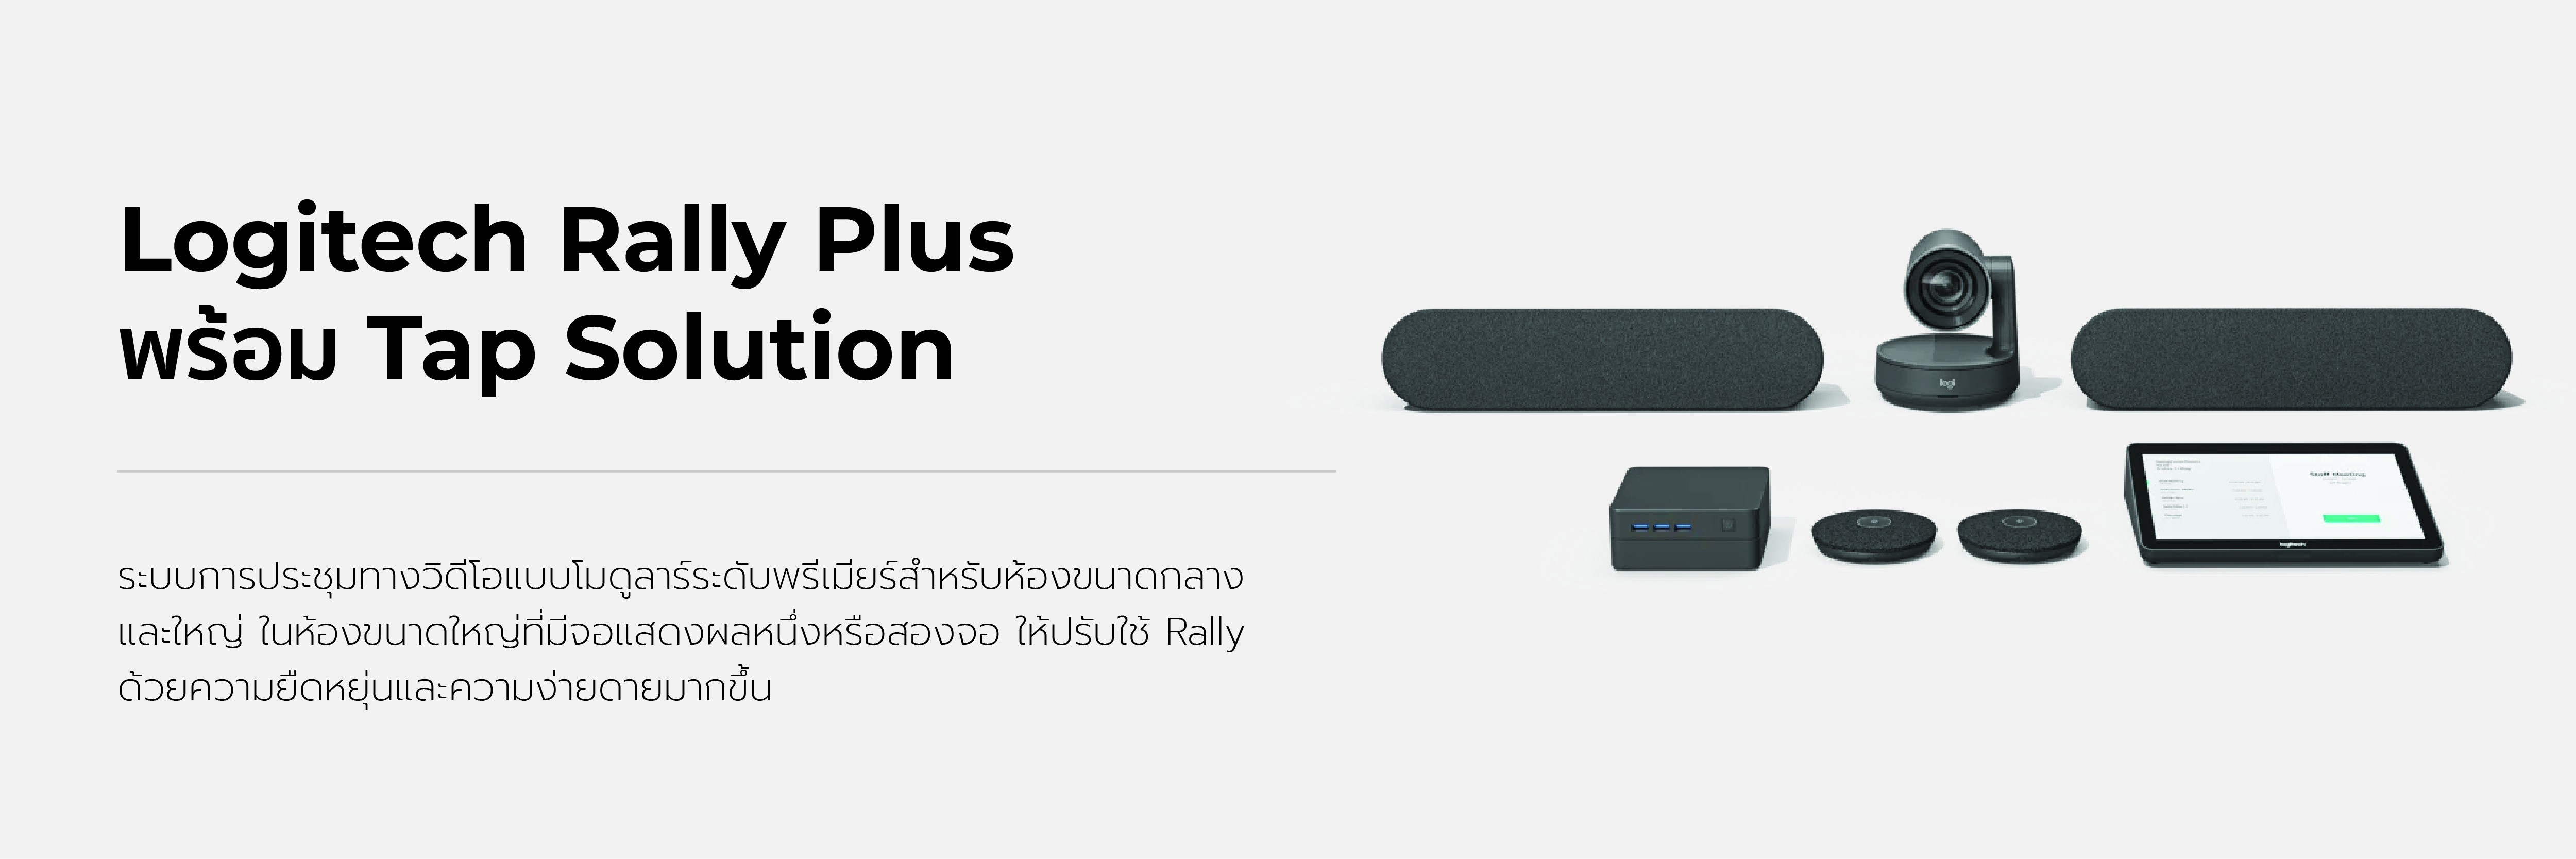 Logitech Rally Plus Solution including two speakers and two mic pods